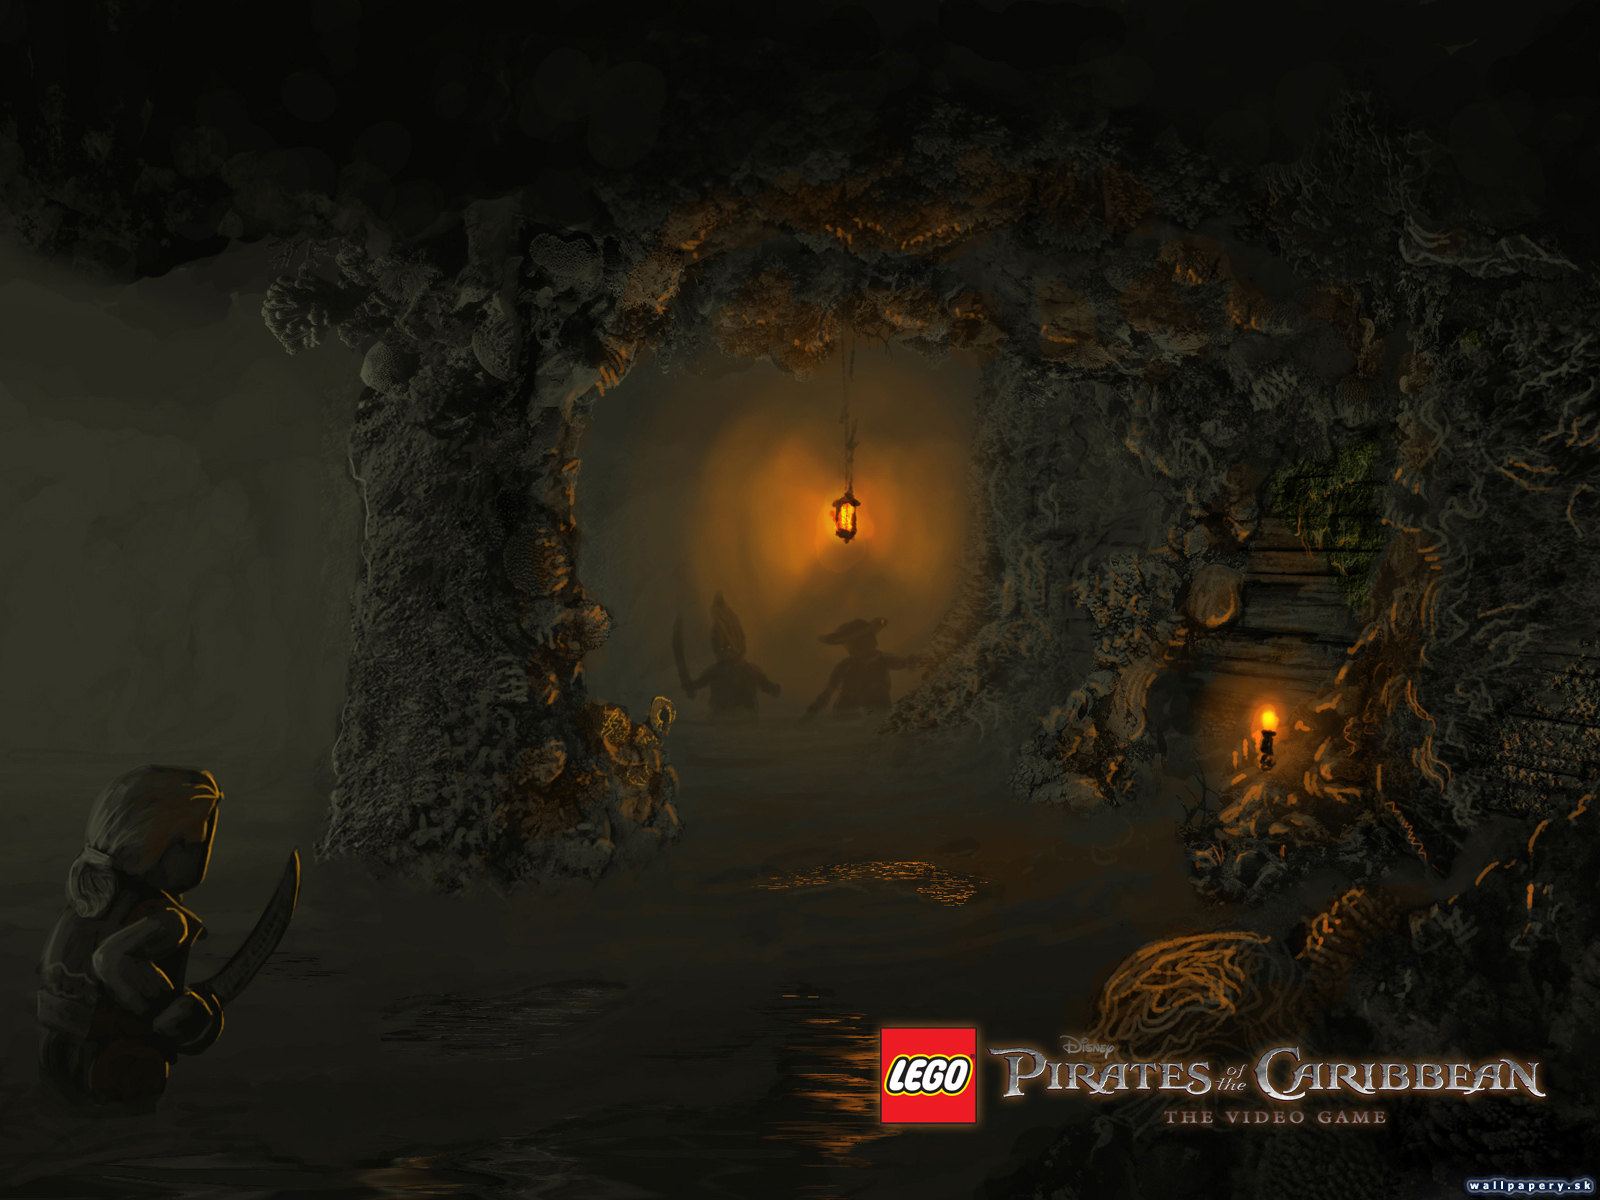 Lego Pirates of the Caribbean: The Video Game - wallpaper 6